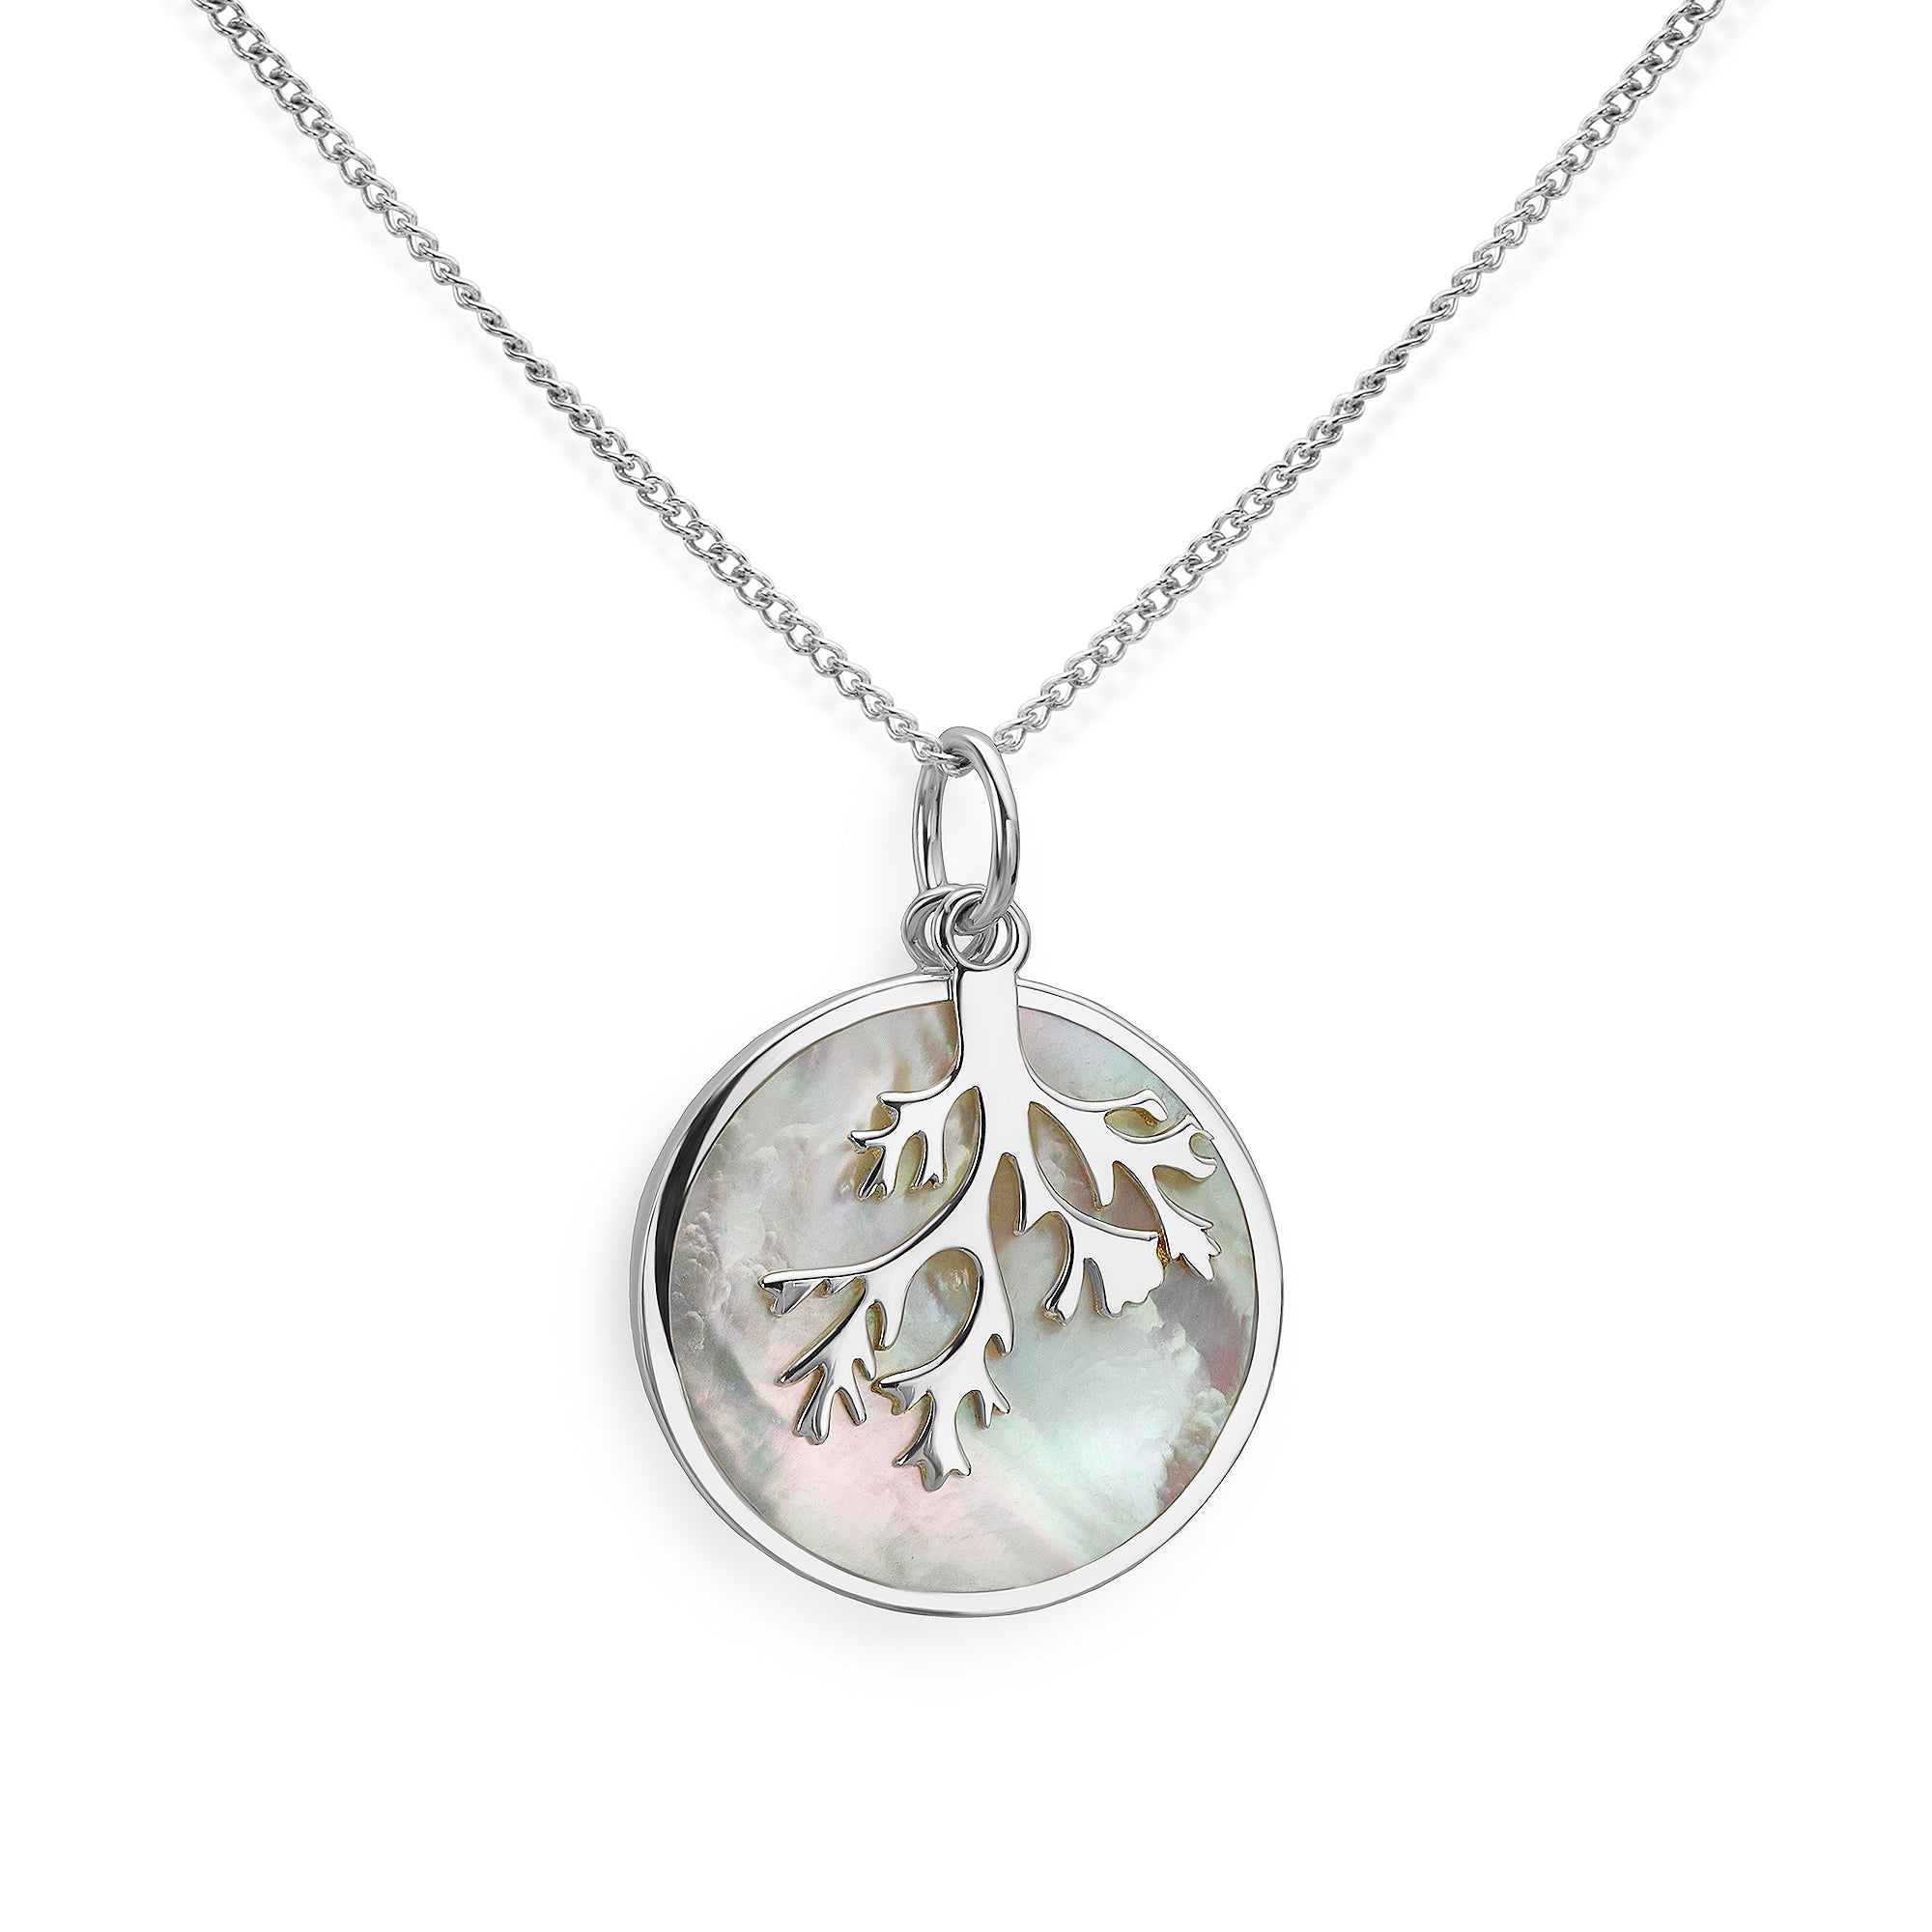 Silver coral and mother of pearl necklace